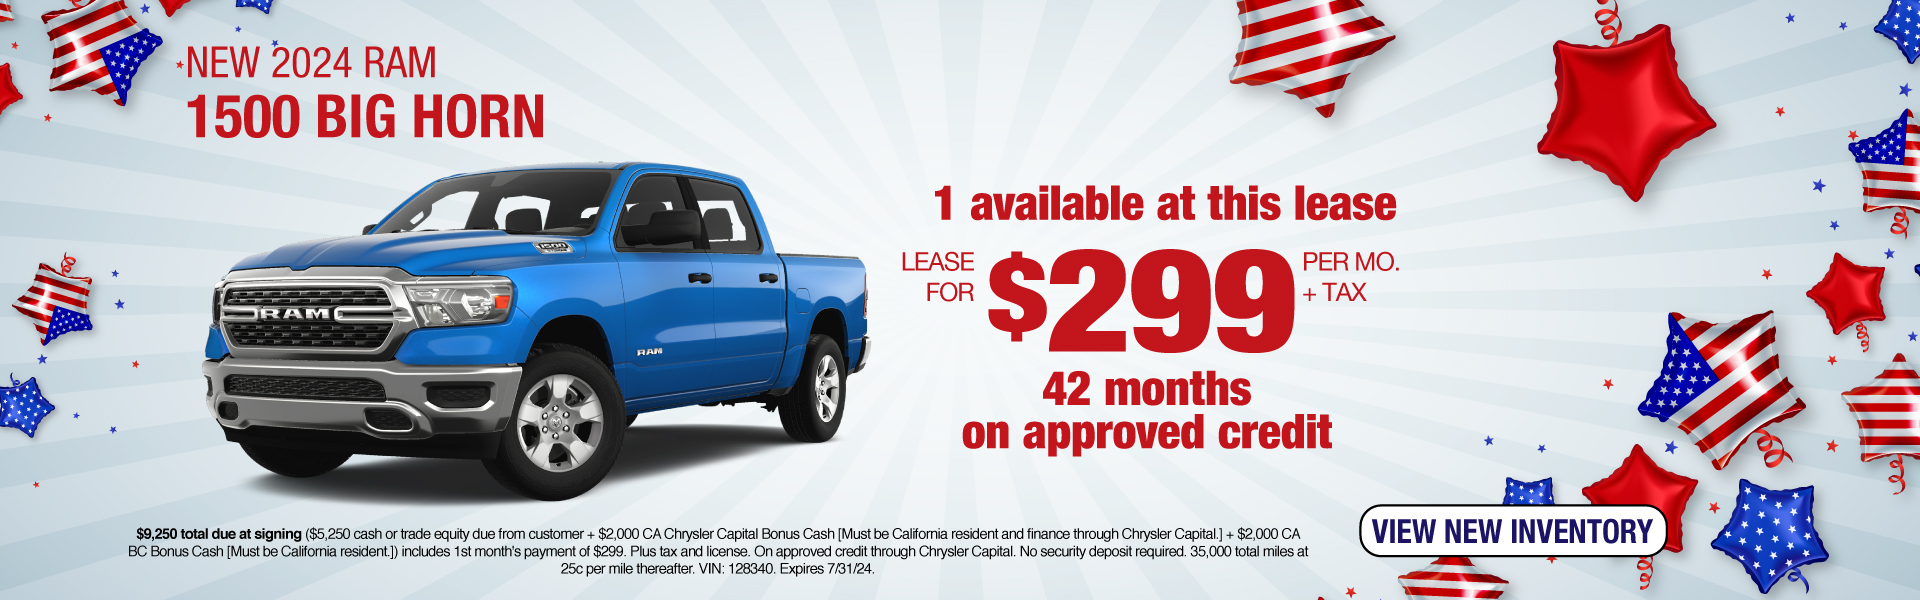 Lease a New 2024 RAM 1500 Big Horn for $299 per month + tax for 42 months on approved credit! Expires 7/31/24.